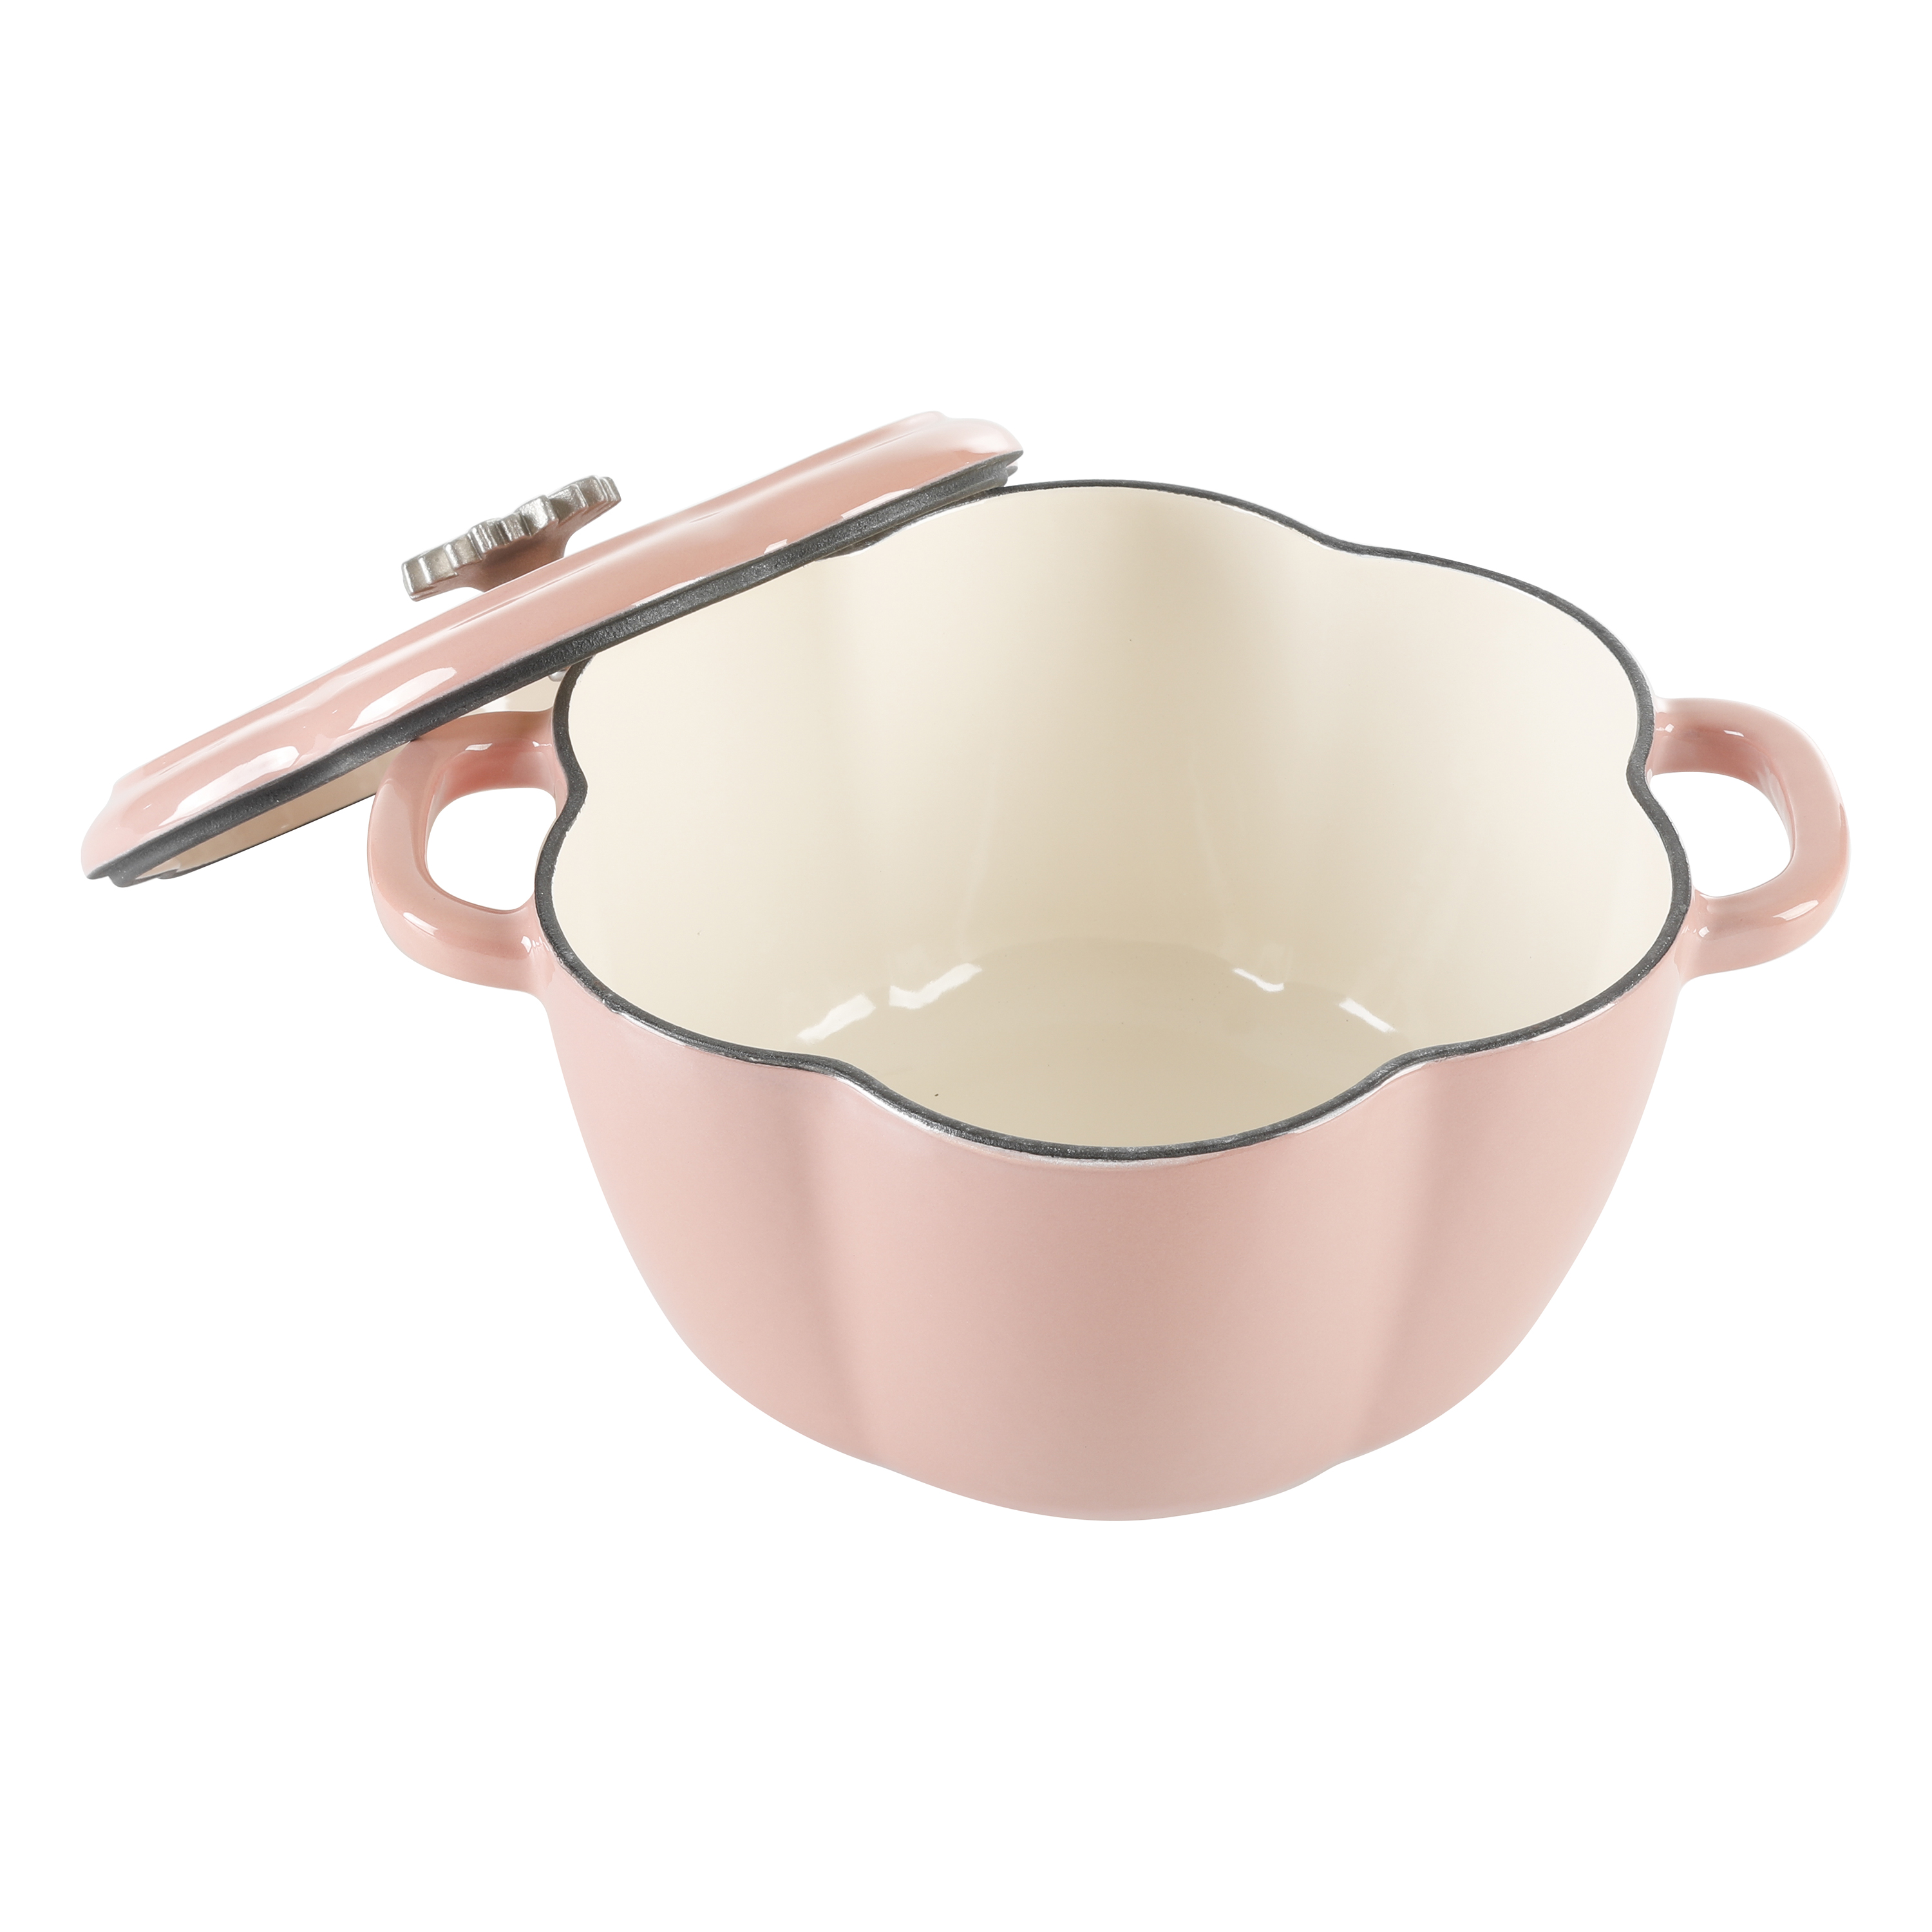 The Pioneer Woman Timeless Beauty Enamel on Cast Iron 3-Quart Dutch Oven, Pink - image 4 of 9